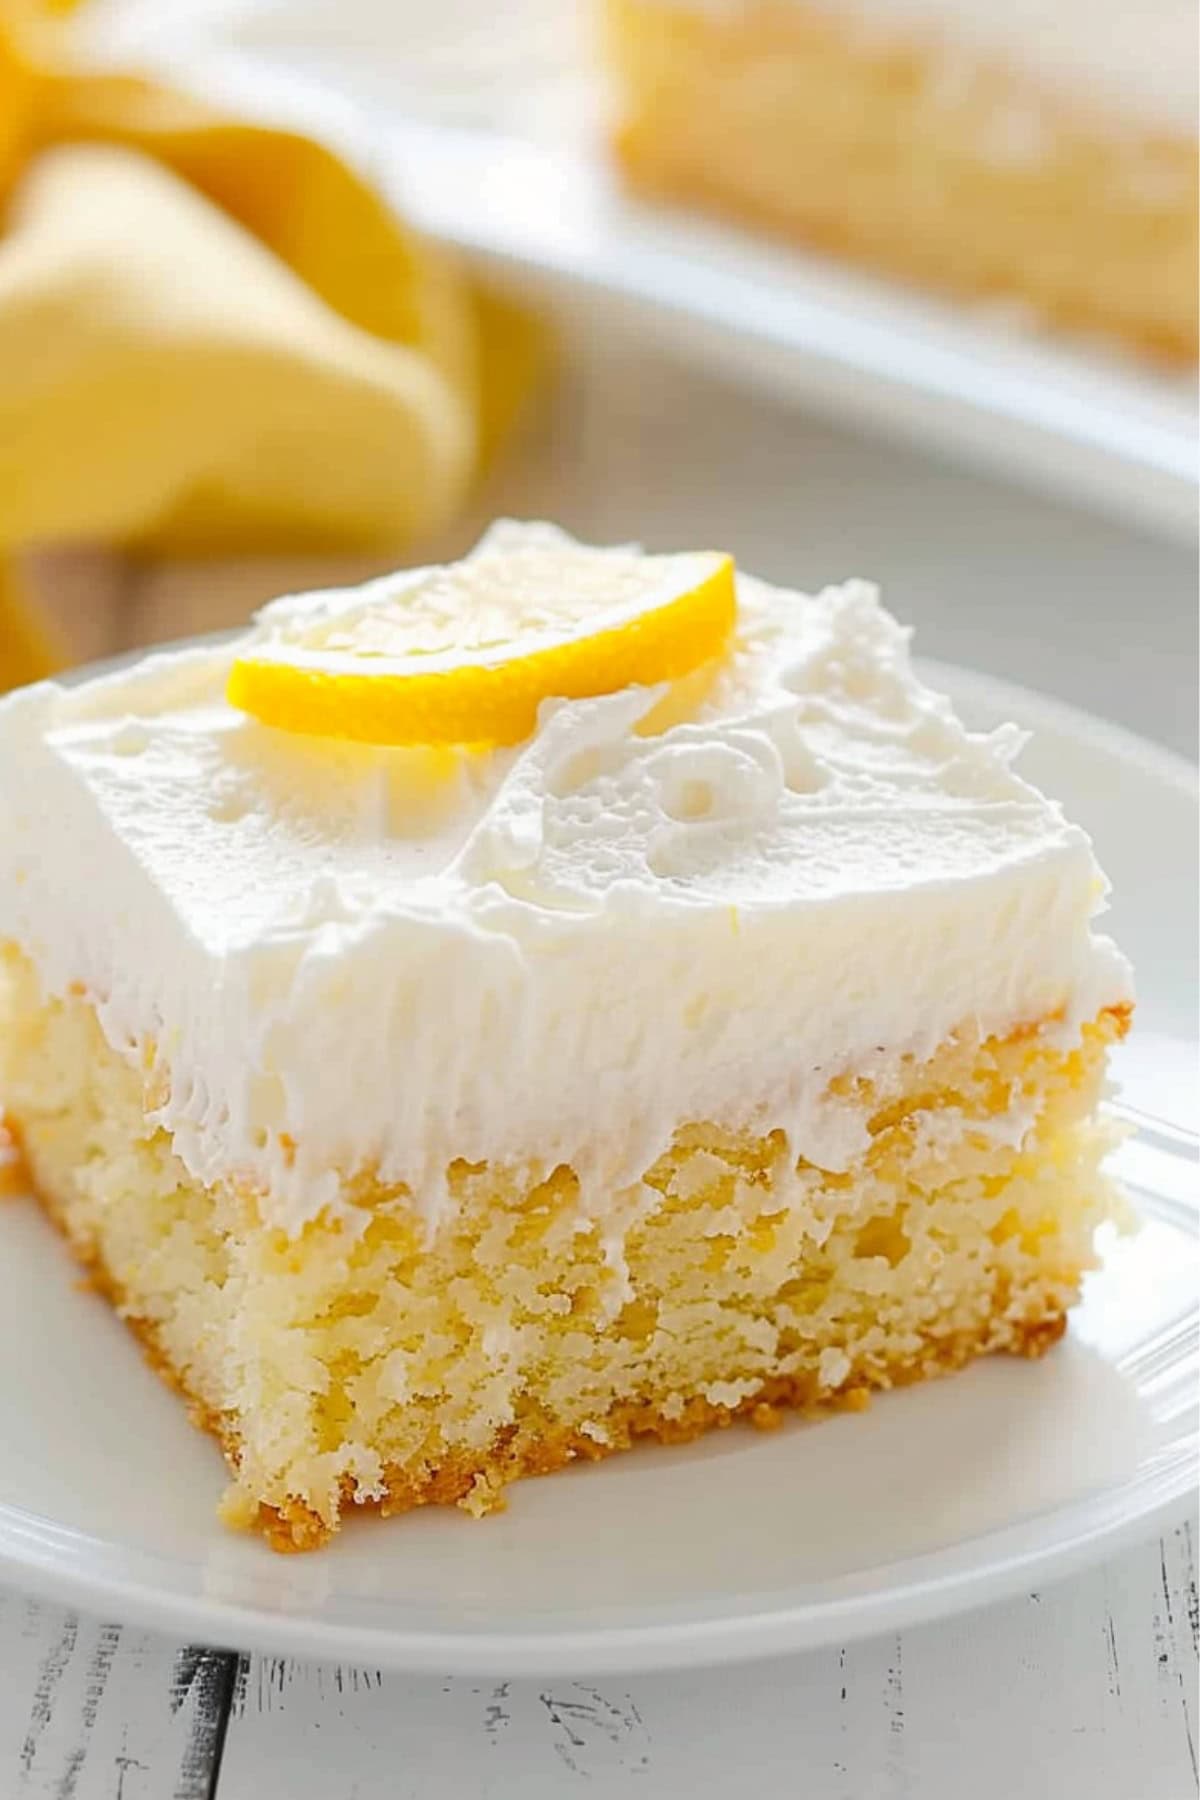 A slice of of lemon crazy cake with cream cheese garnished with lemon slice served on a white plate.